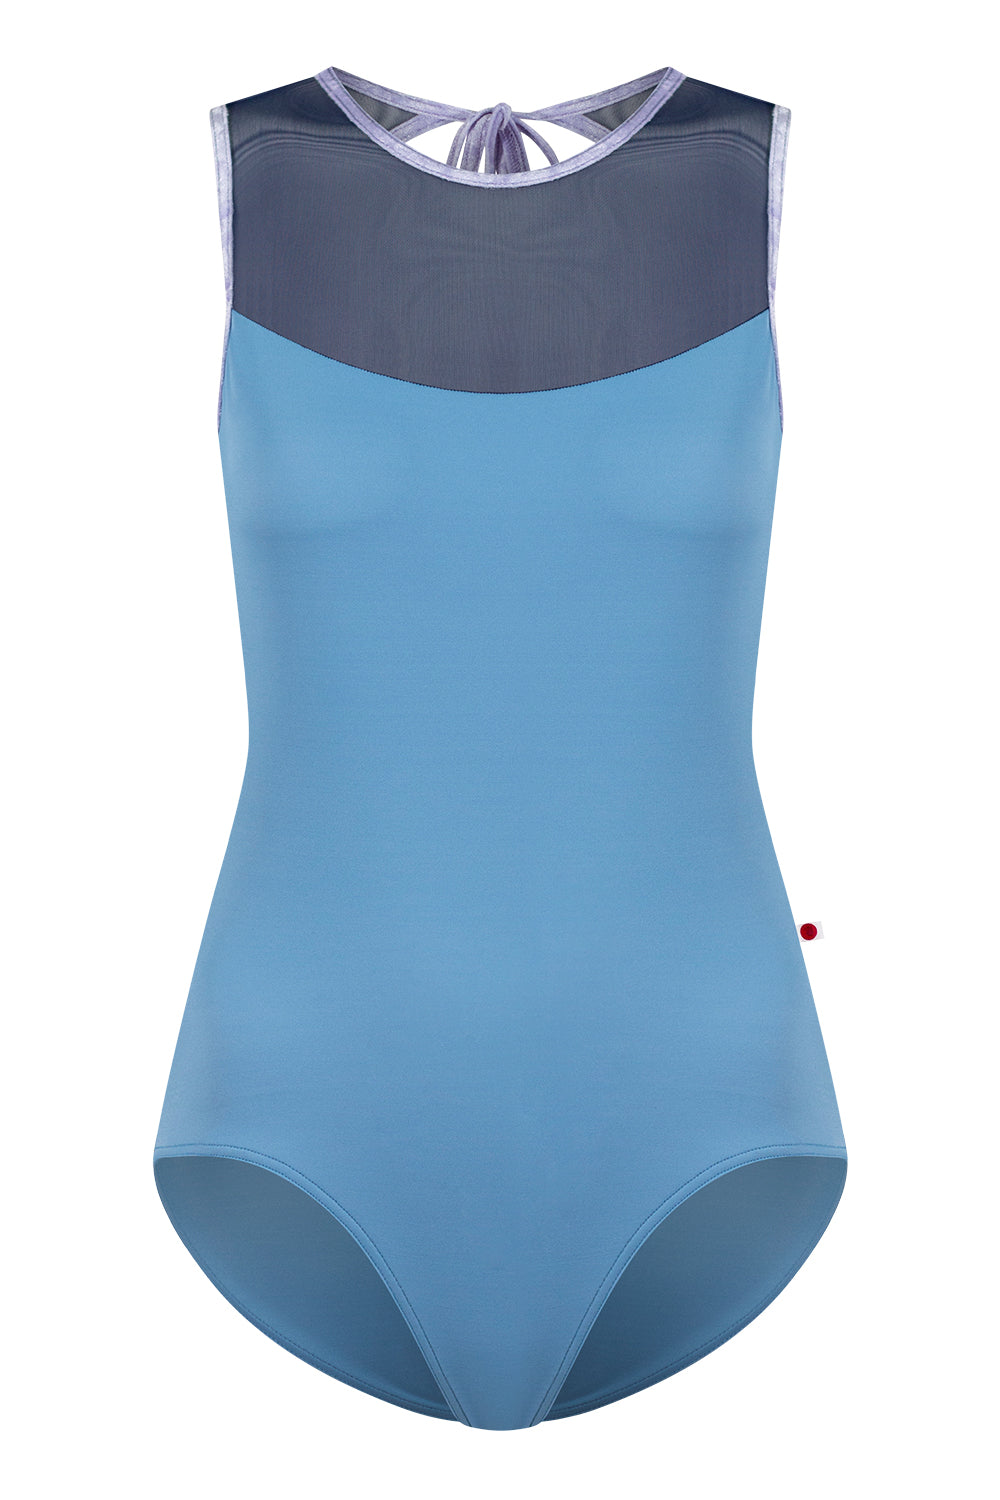 Olivia leotard in T-Bluebell body color with Mesh Dark Blue top color and V-Angelic trim color